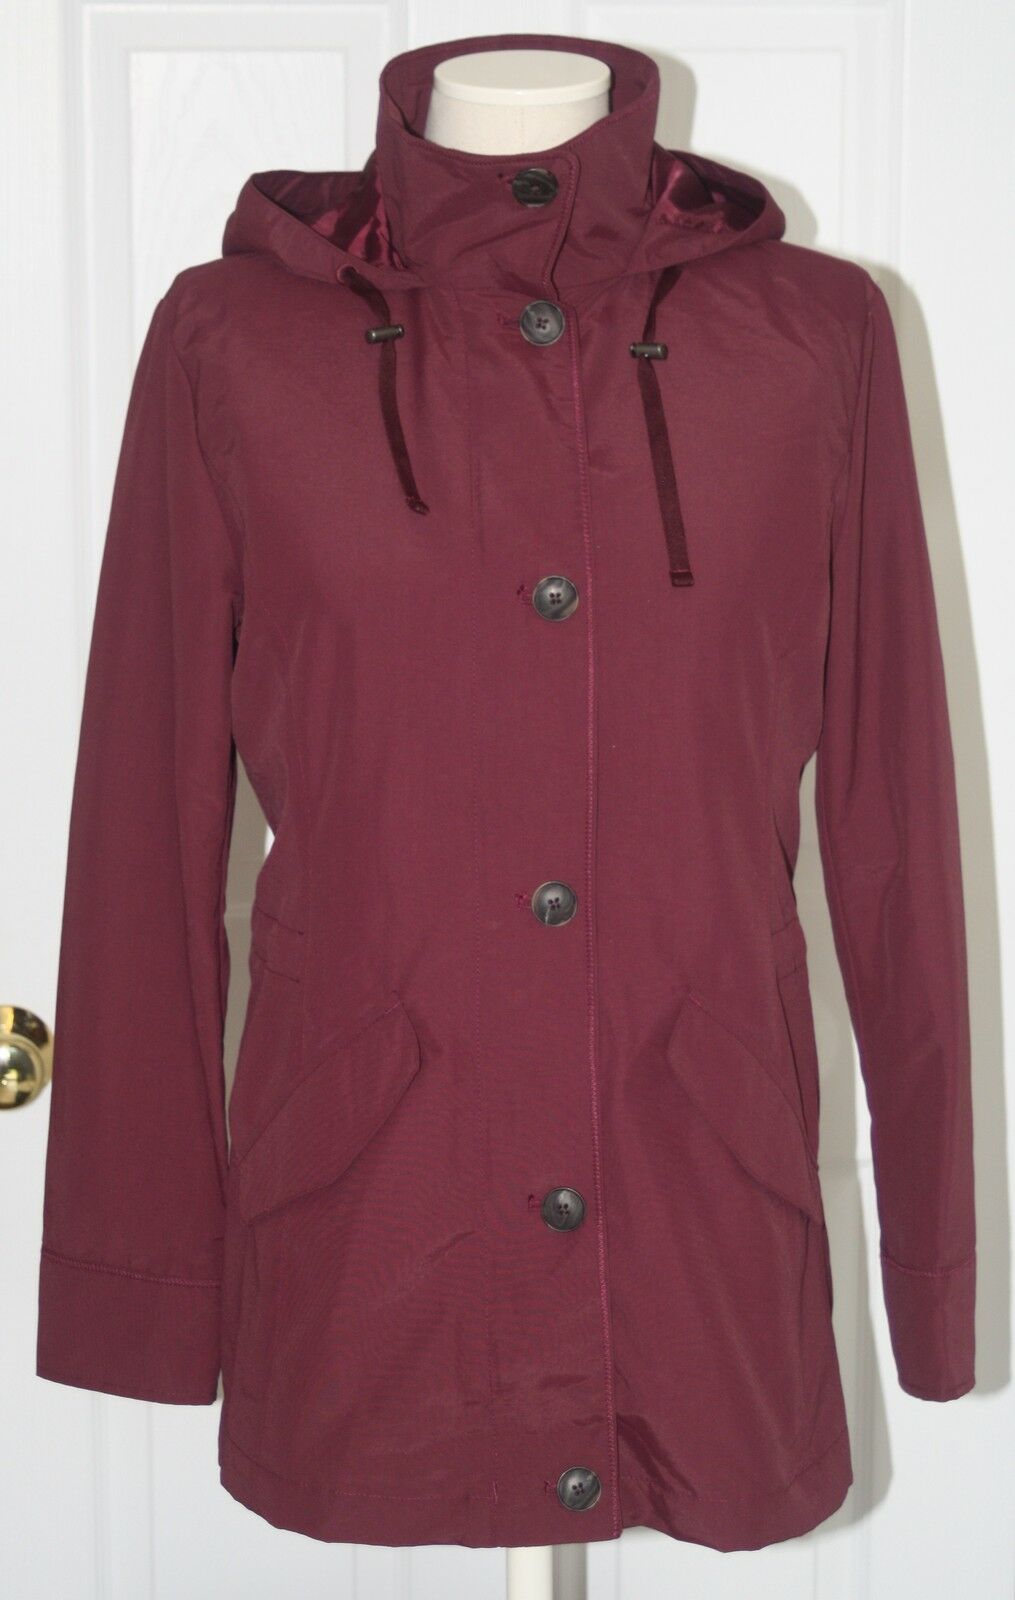 Primary image for Lands End Women's Storm Raker Jacket Mulberry Wine New